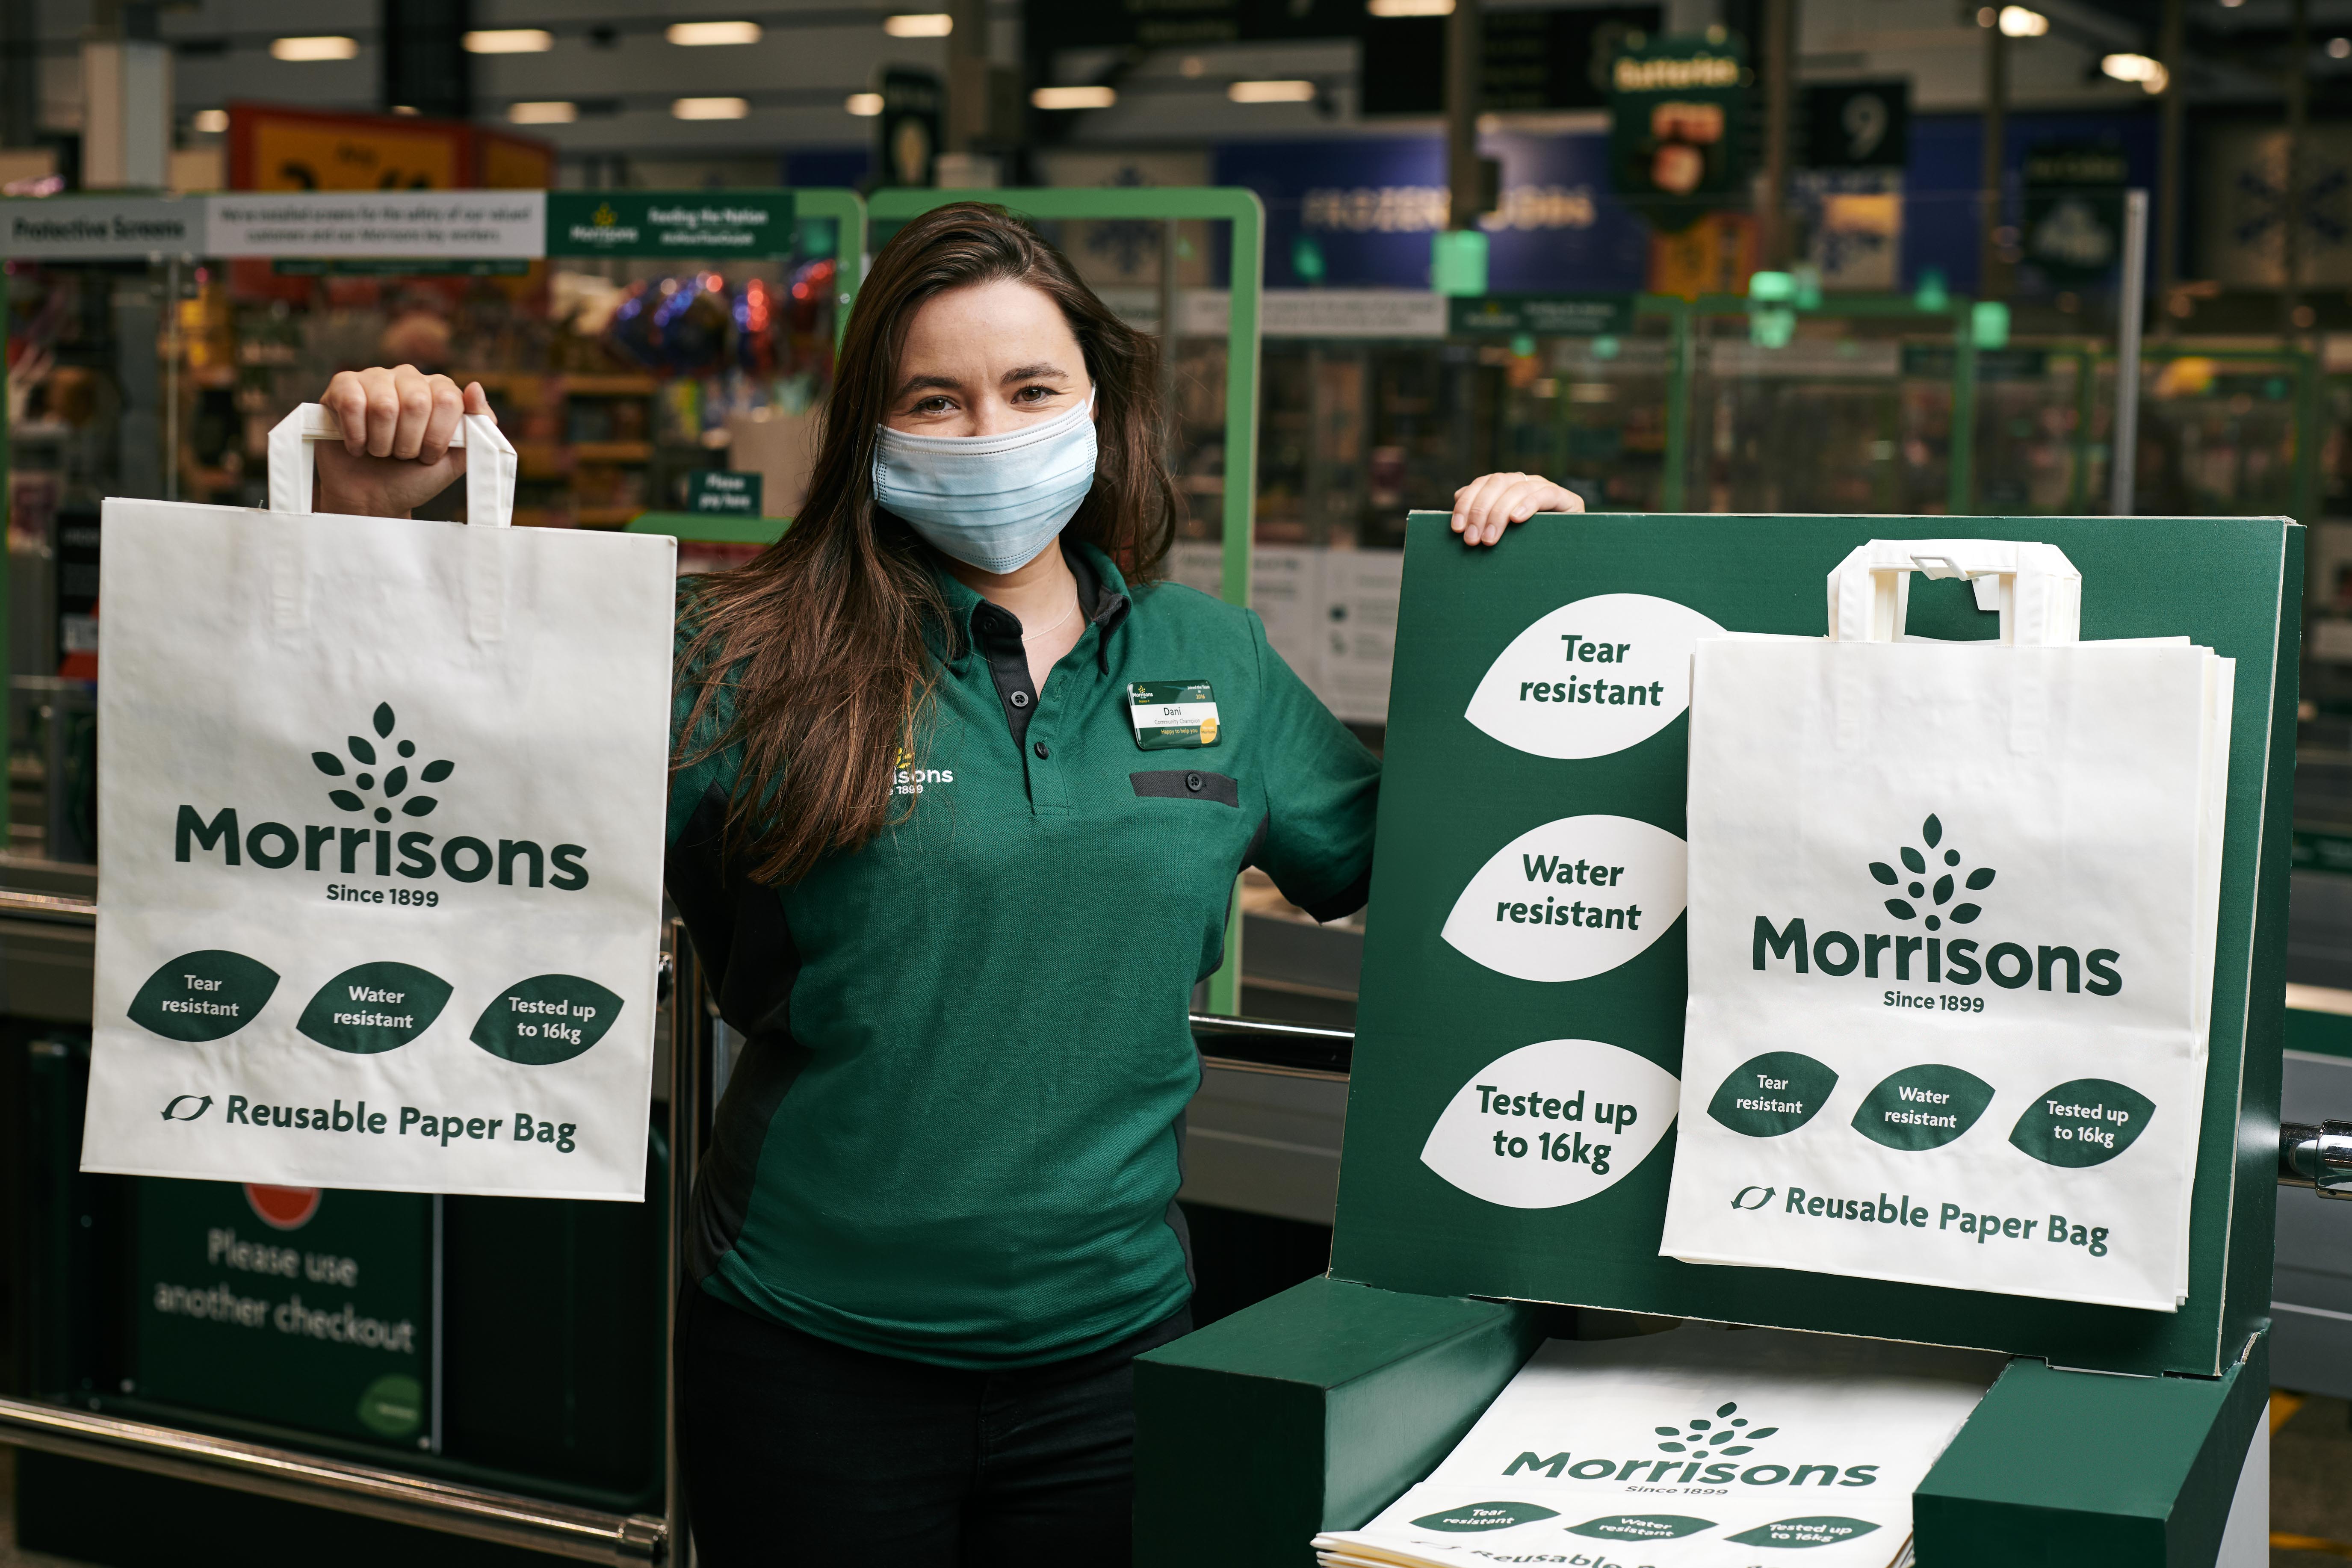 Morrisons plans to become the first supermarket to remove all plastic carrier bags at checkouts